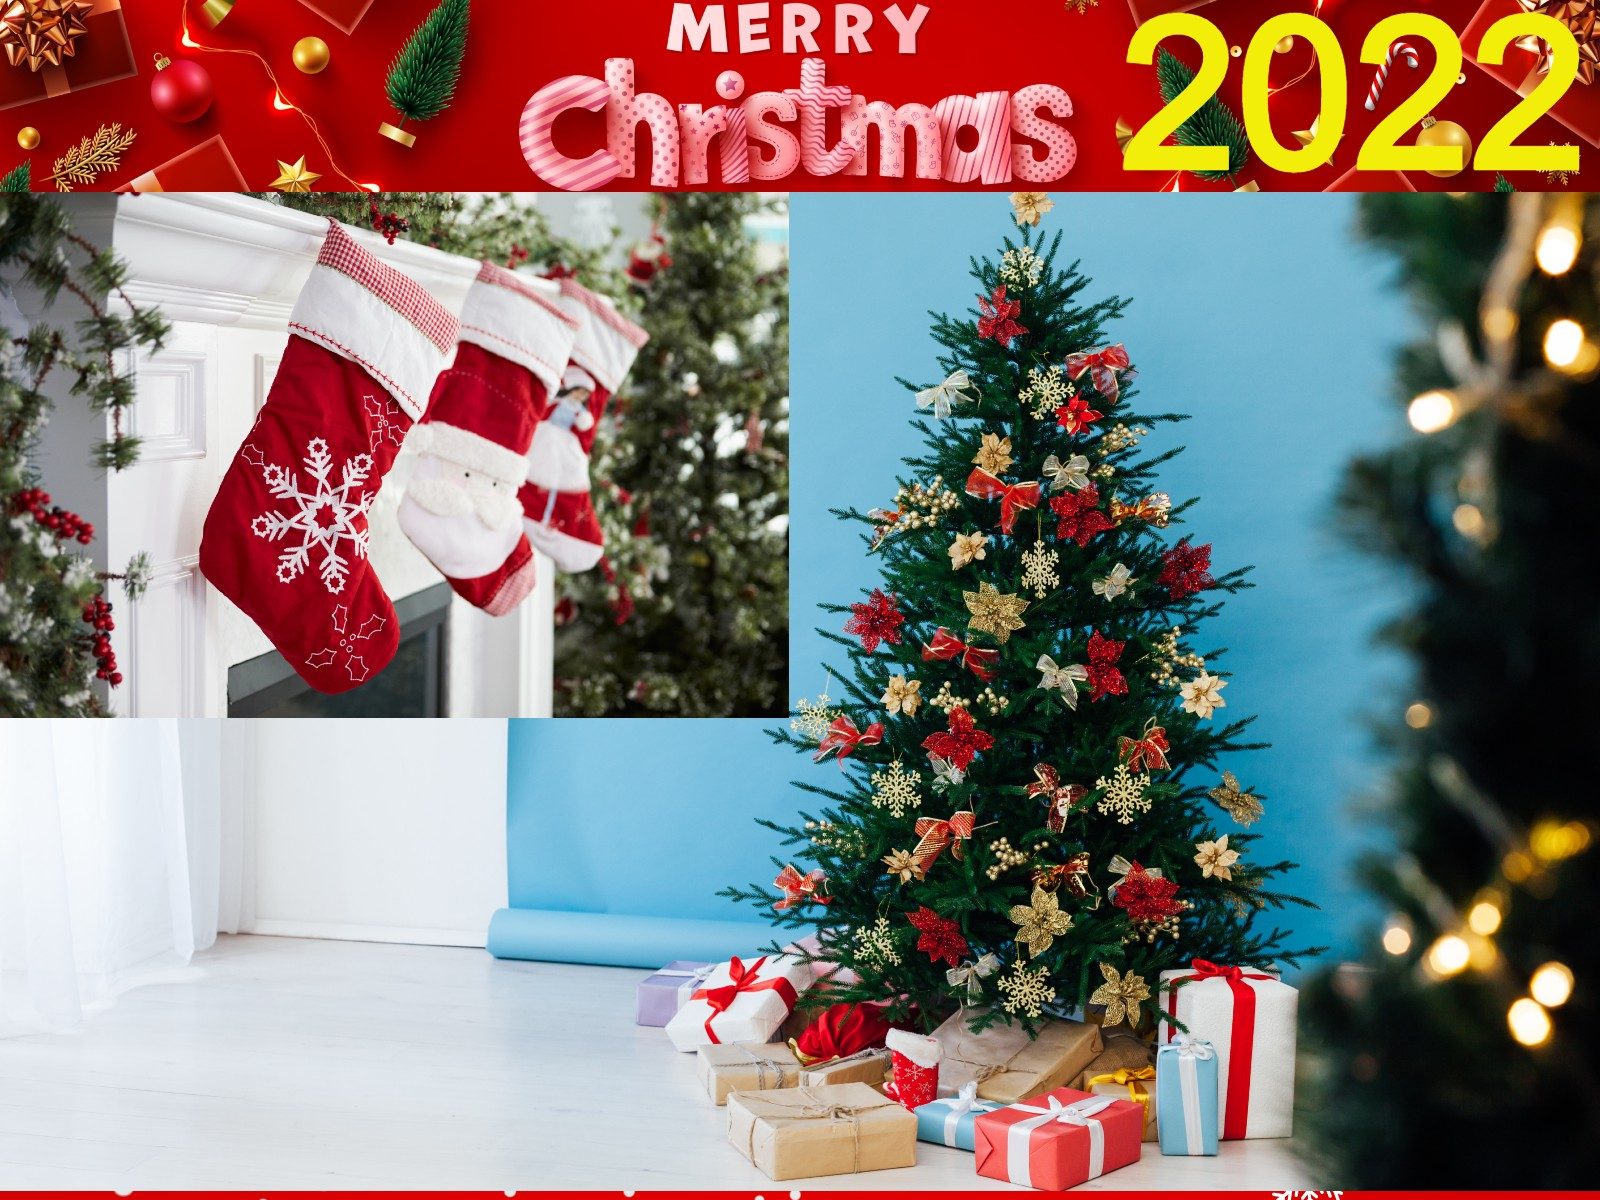 Christmas 2022: Here's How You Can Decorate Your Home to Make it  Picture-Perfect for the Holiday